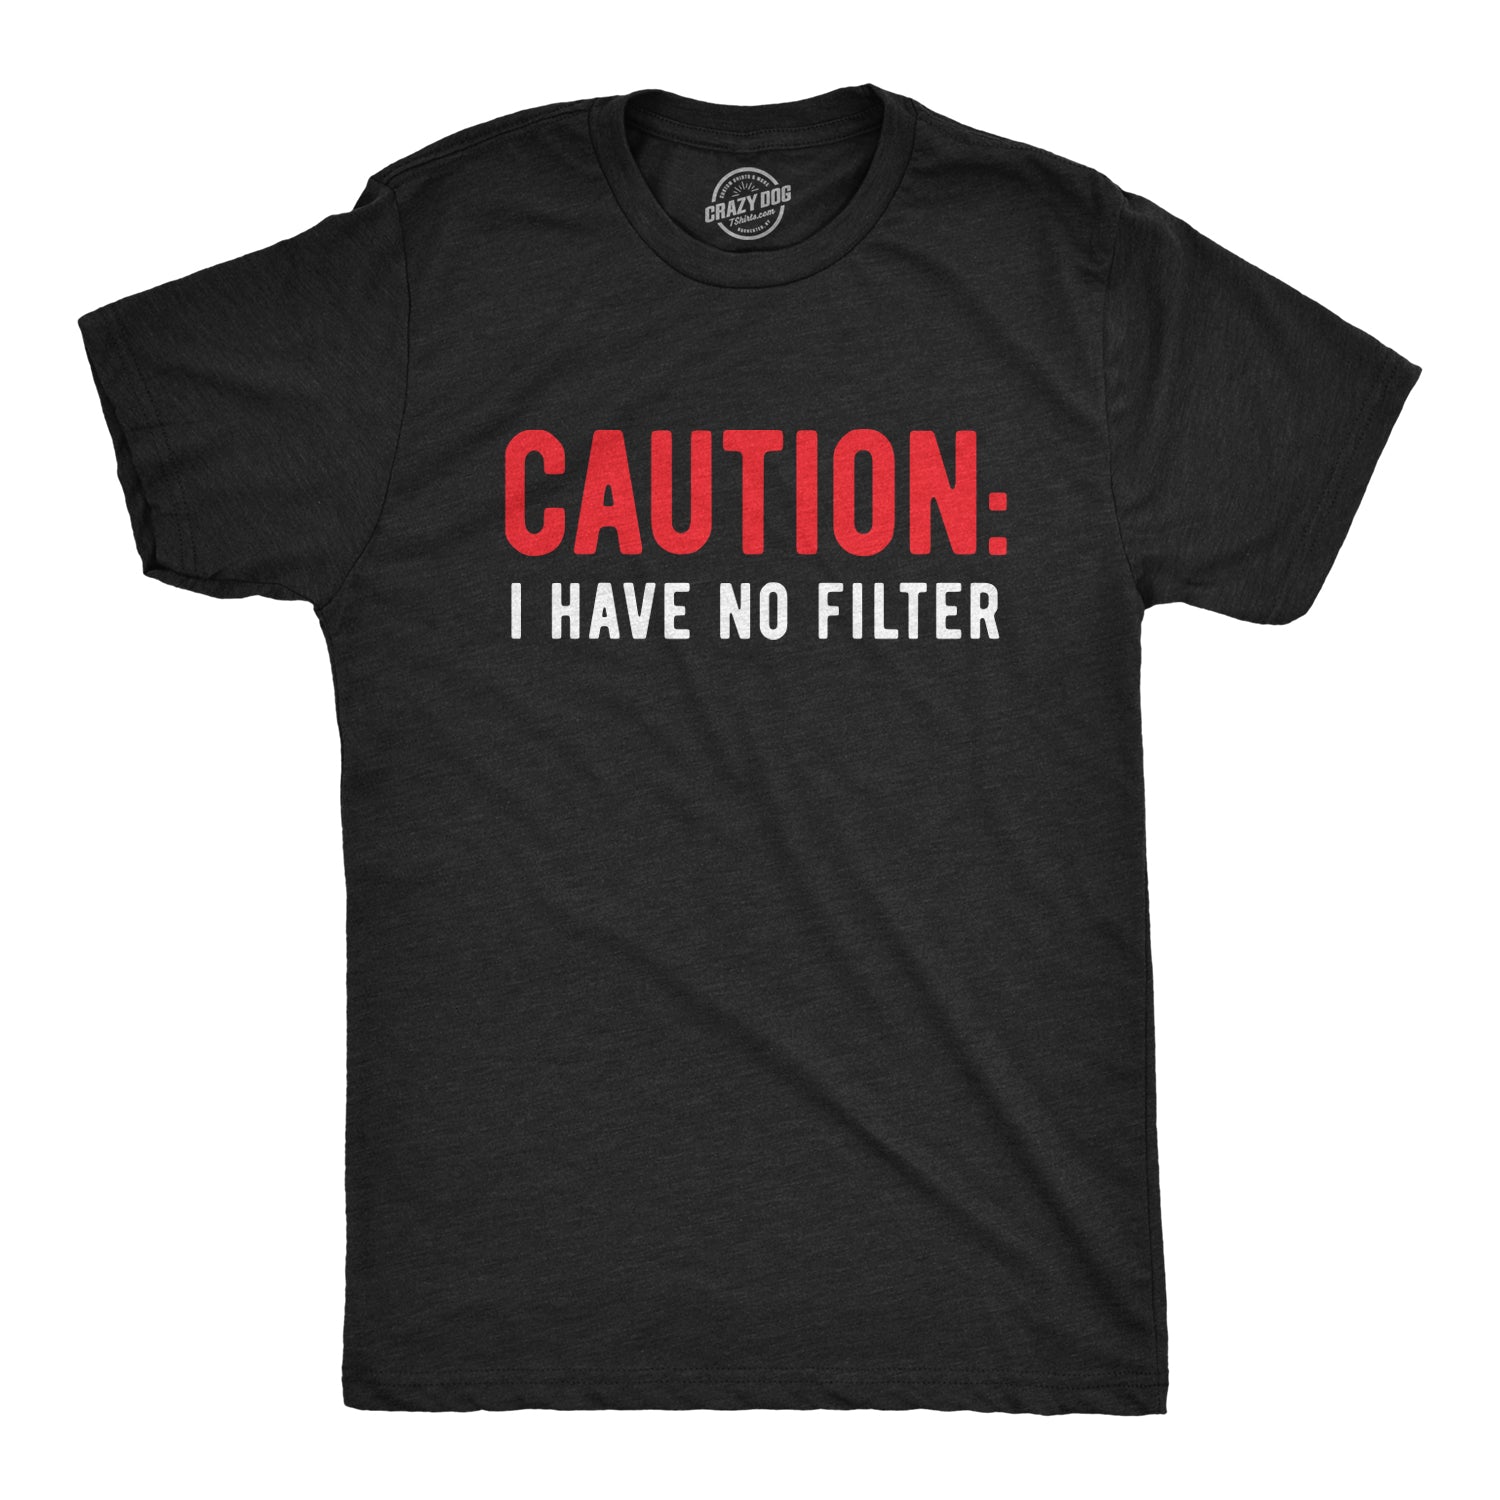 Funny Heather Black Caution I Have No Filter Mens T Shirt Nerdy Sarcastic Tee